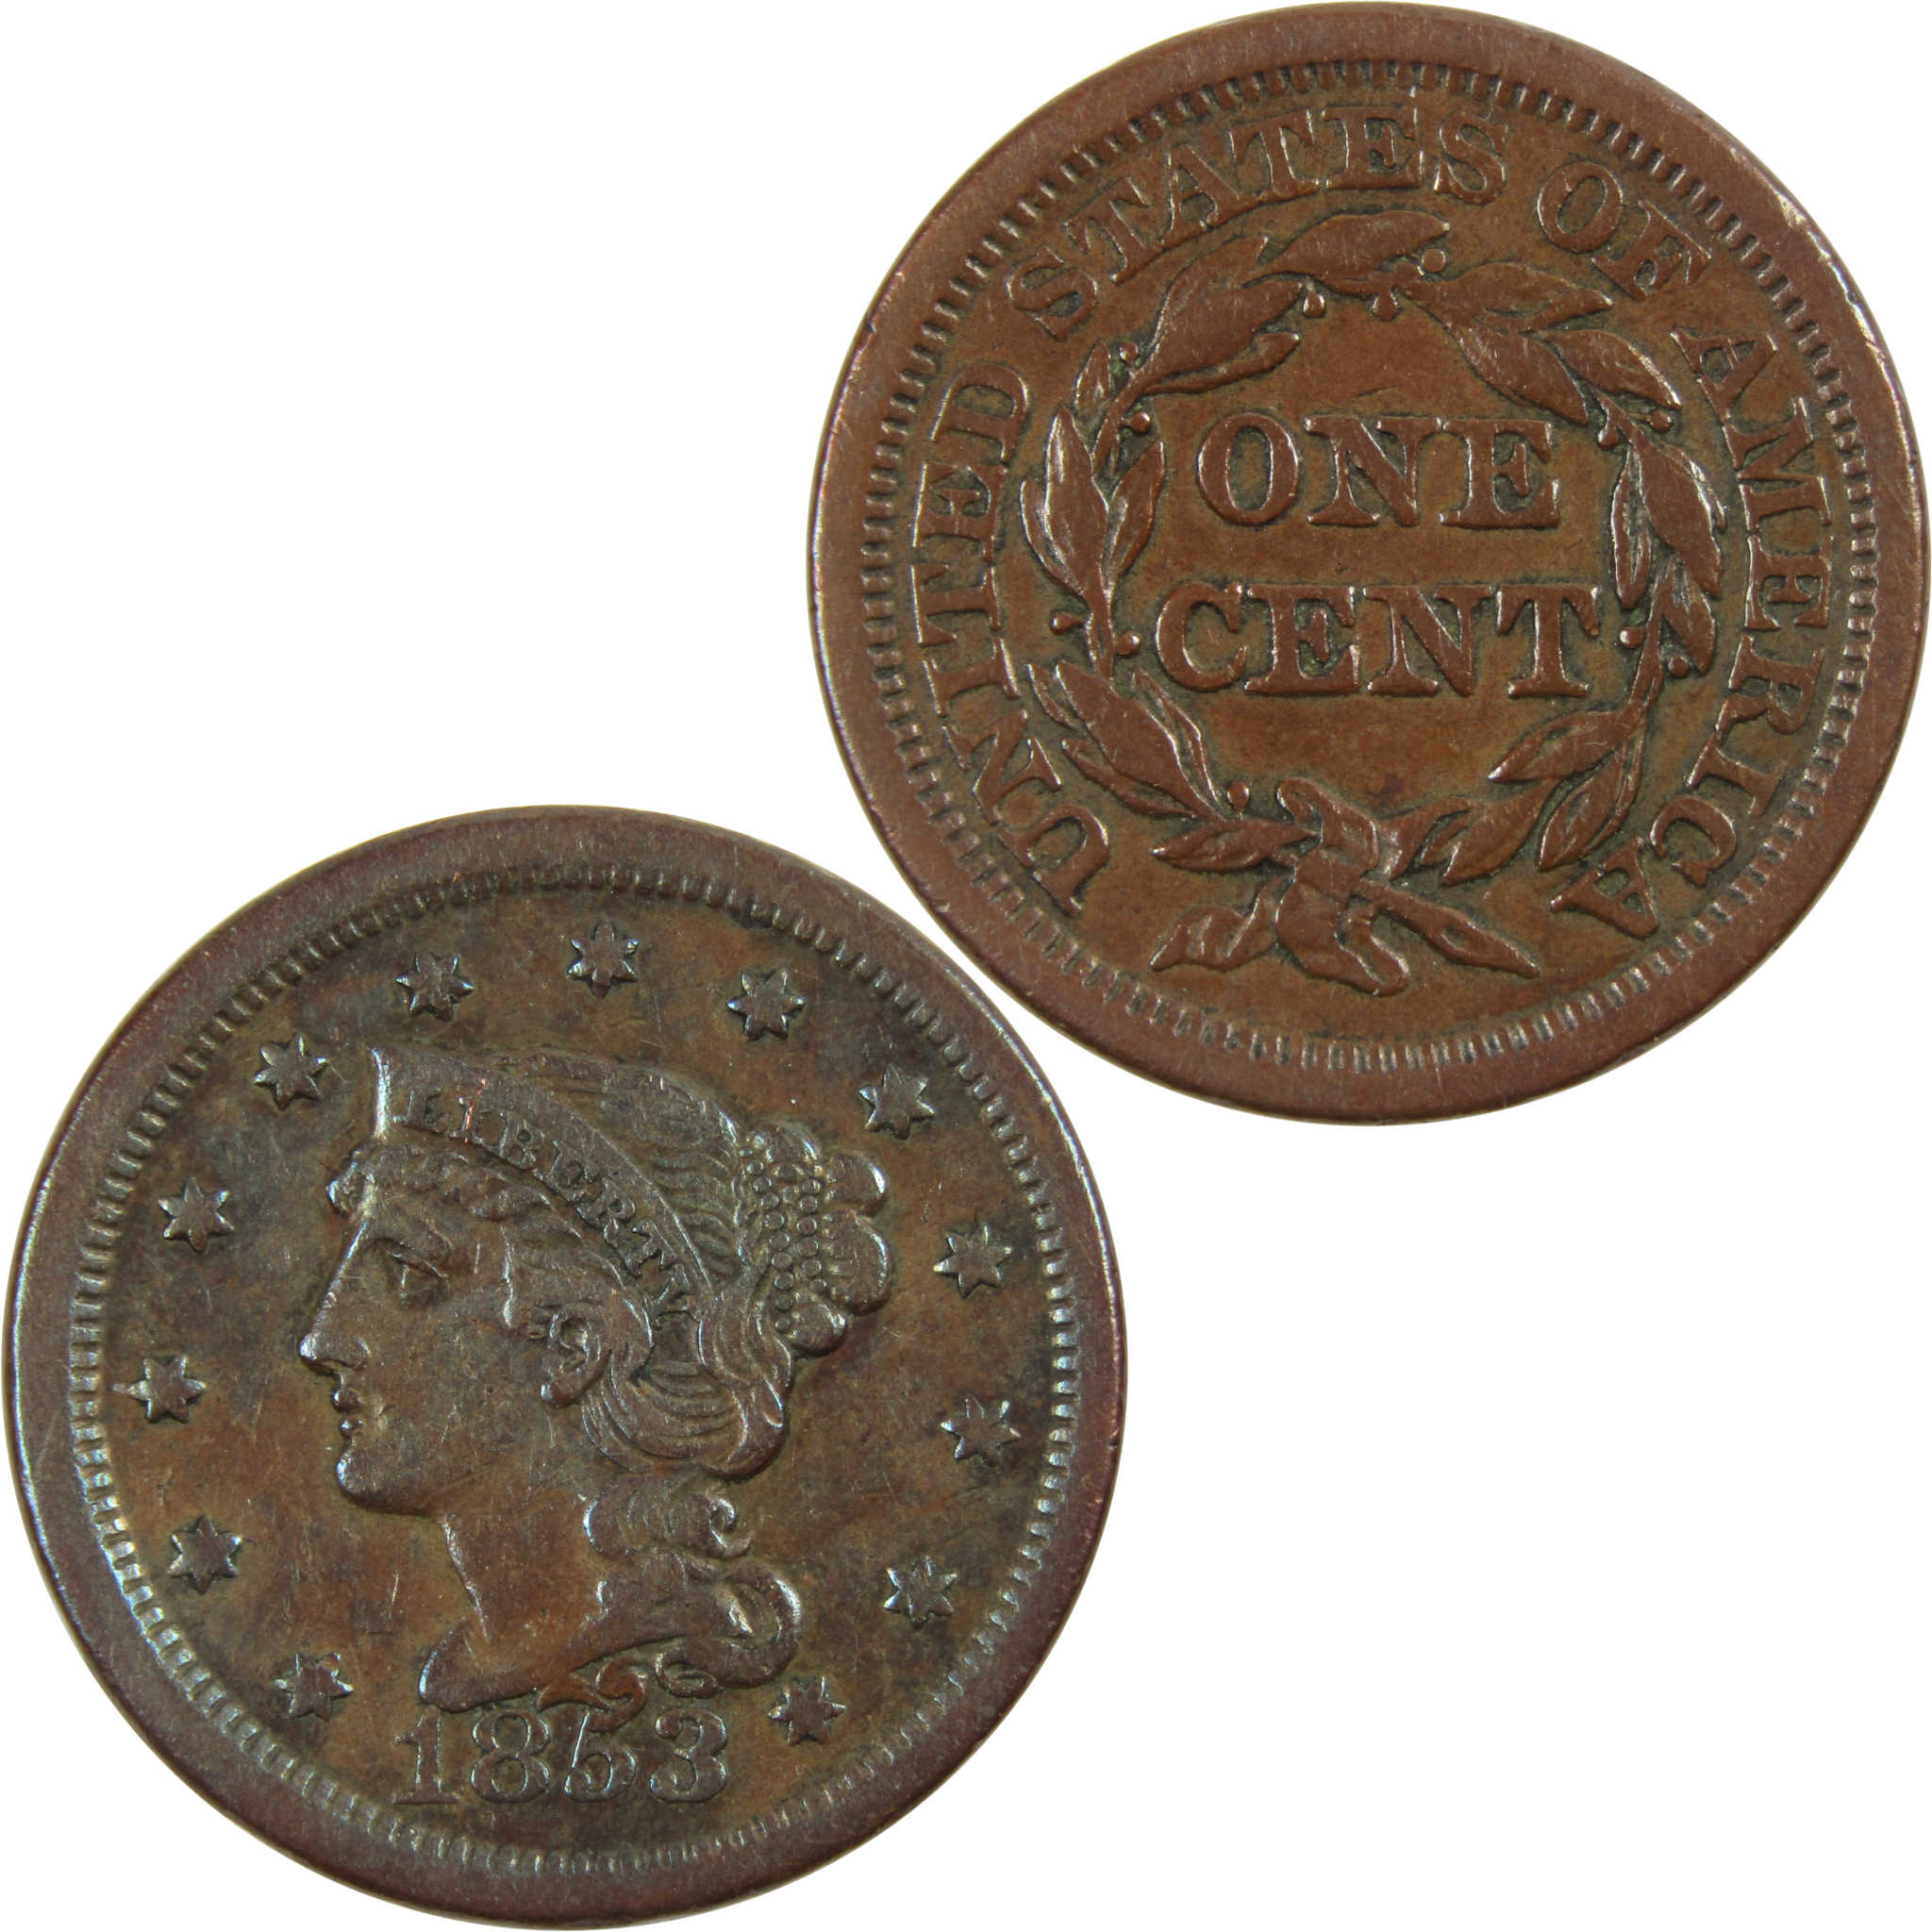 1853 Braided Hair Large Cent VF Very Fine Copper Penny SKU:I8160